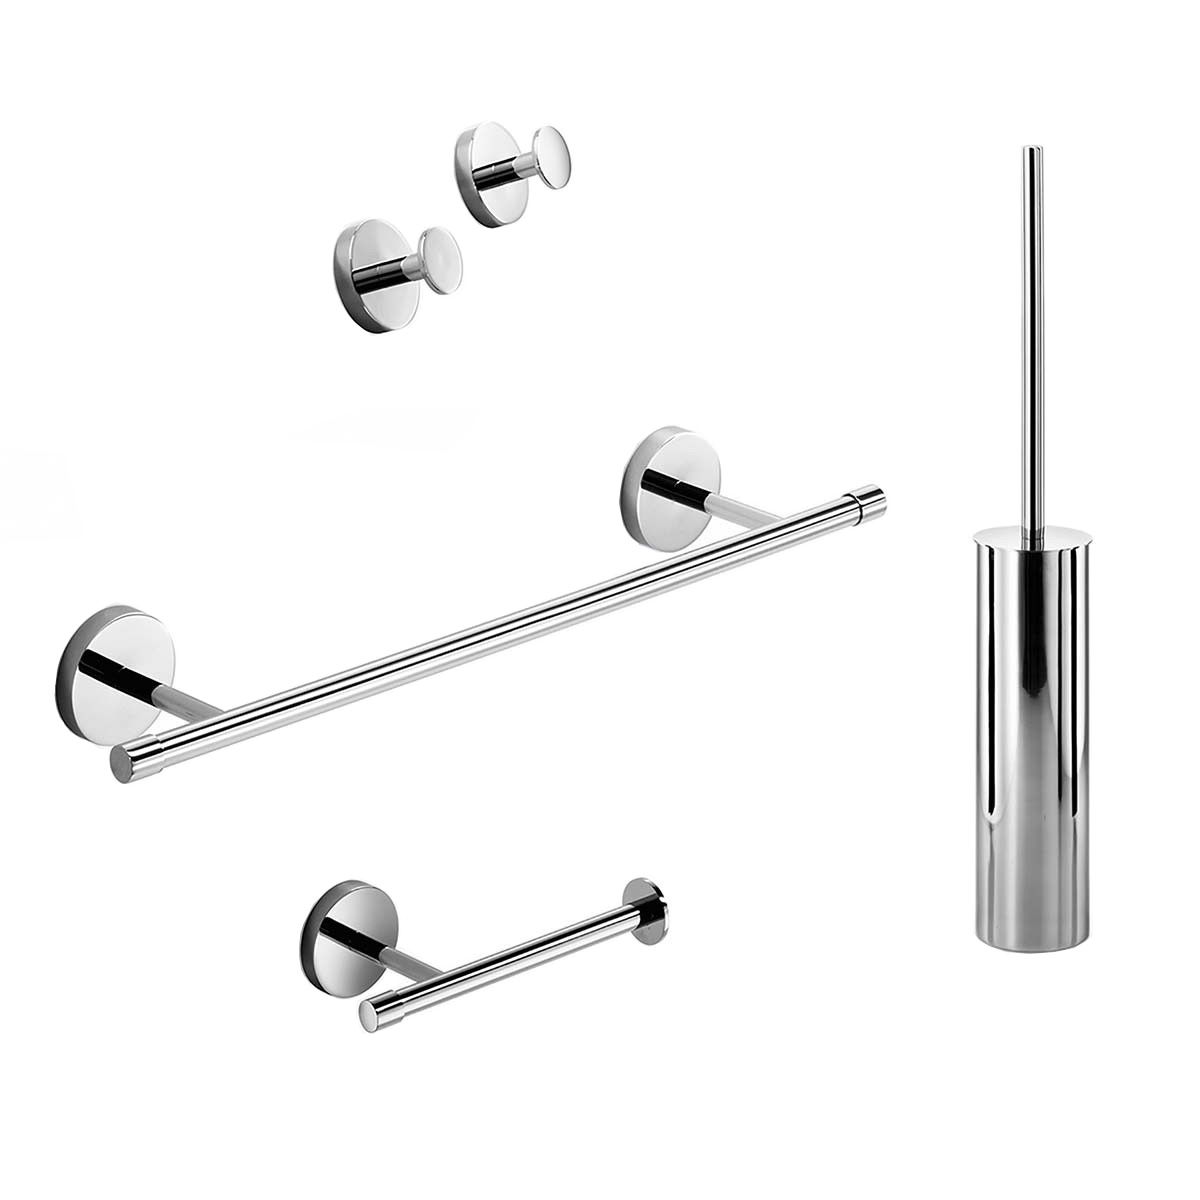 Where To Place Bathroom Accessories, Bathtub Shower Accessories